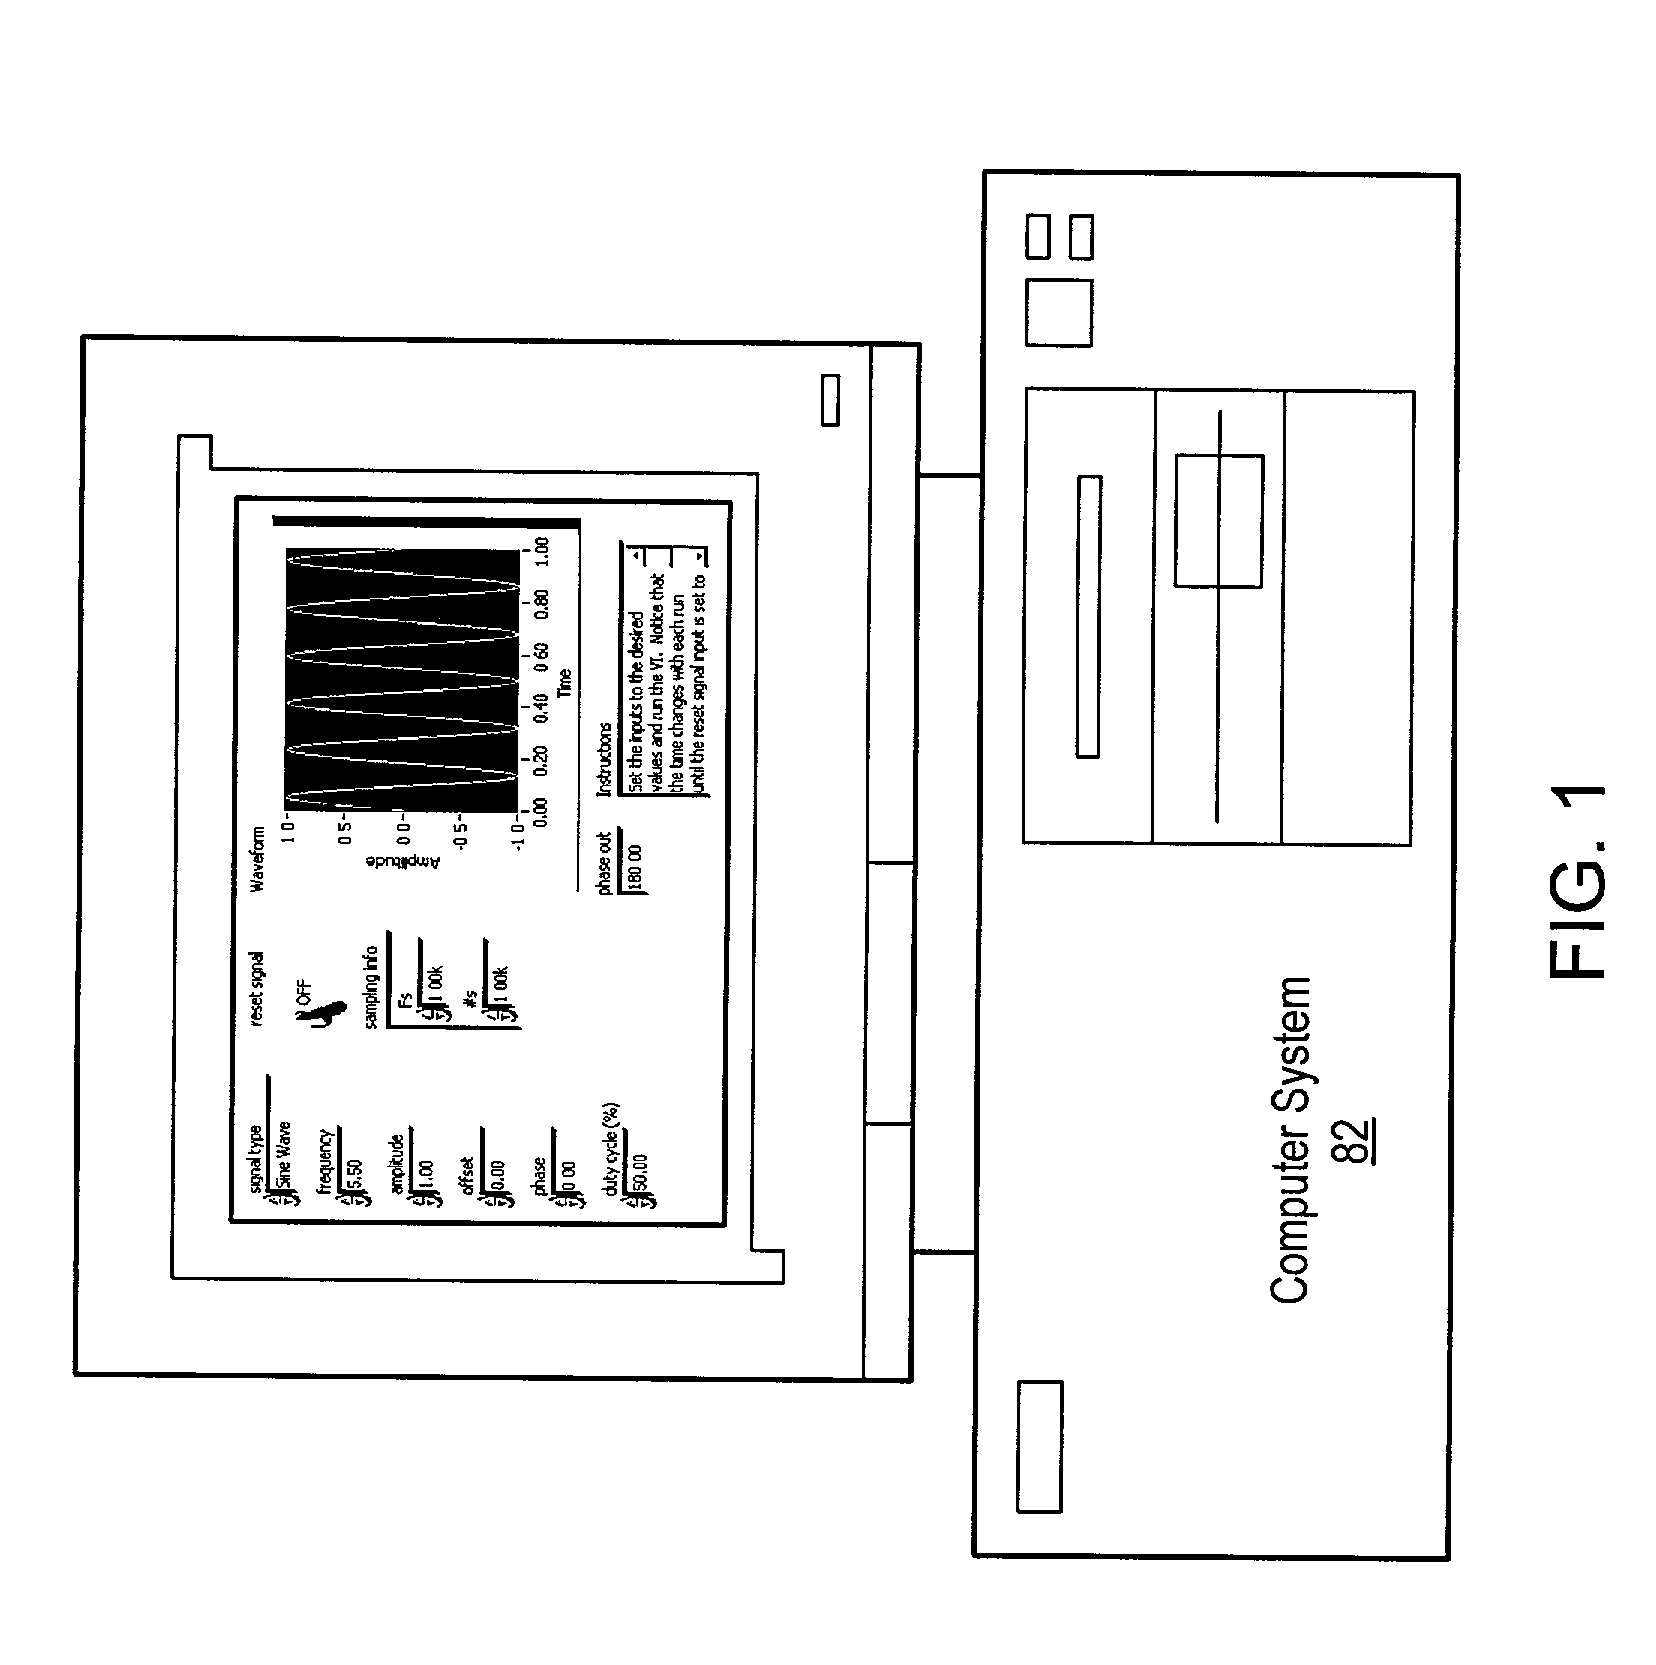 System and method for associating a block diagram with a user interface element